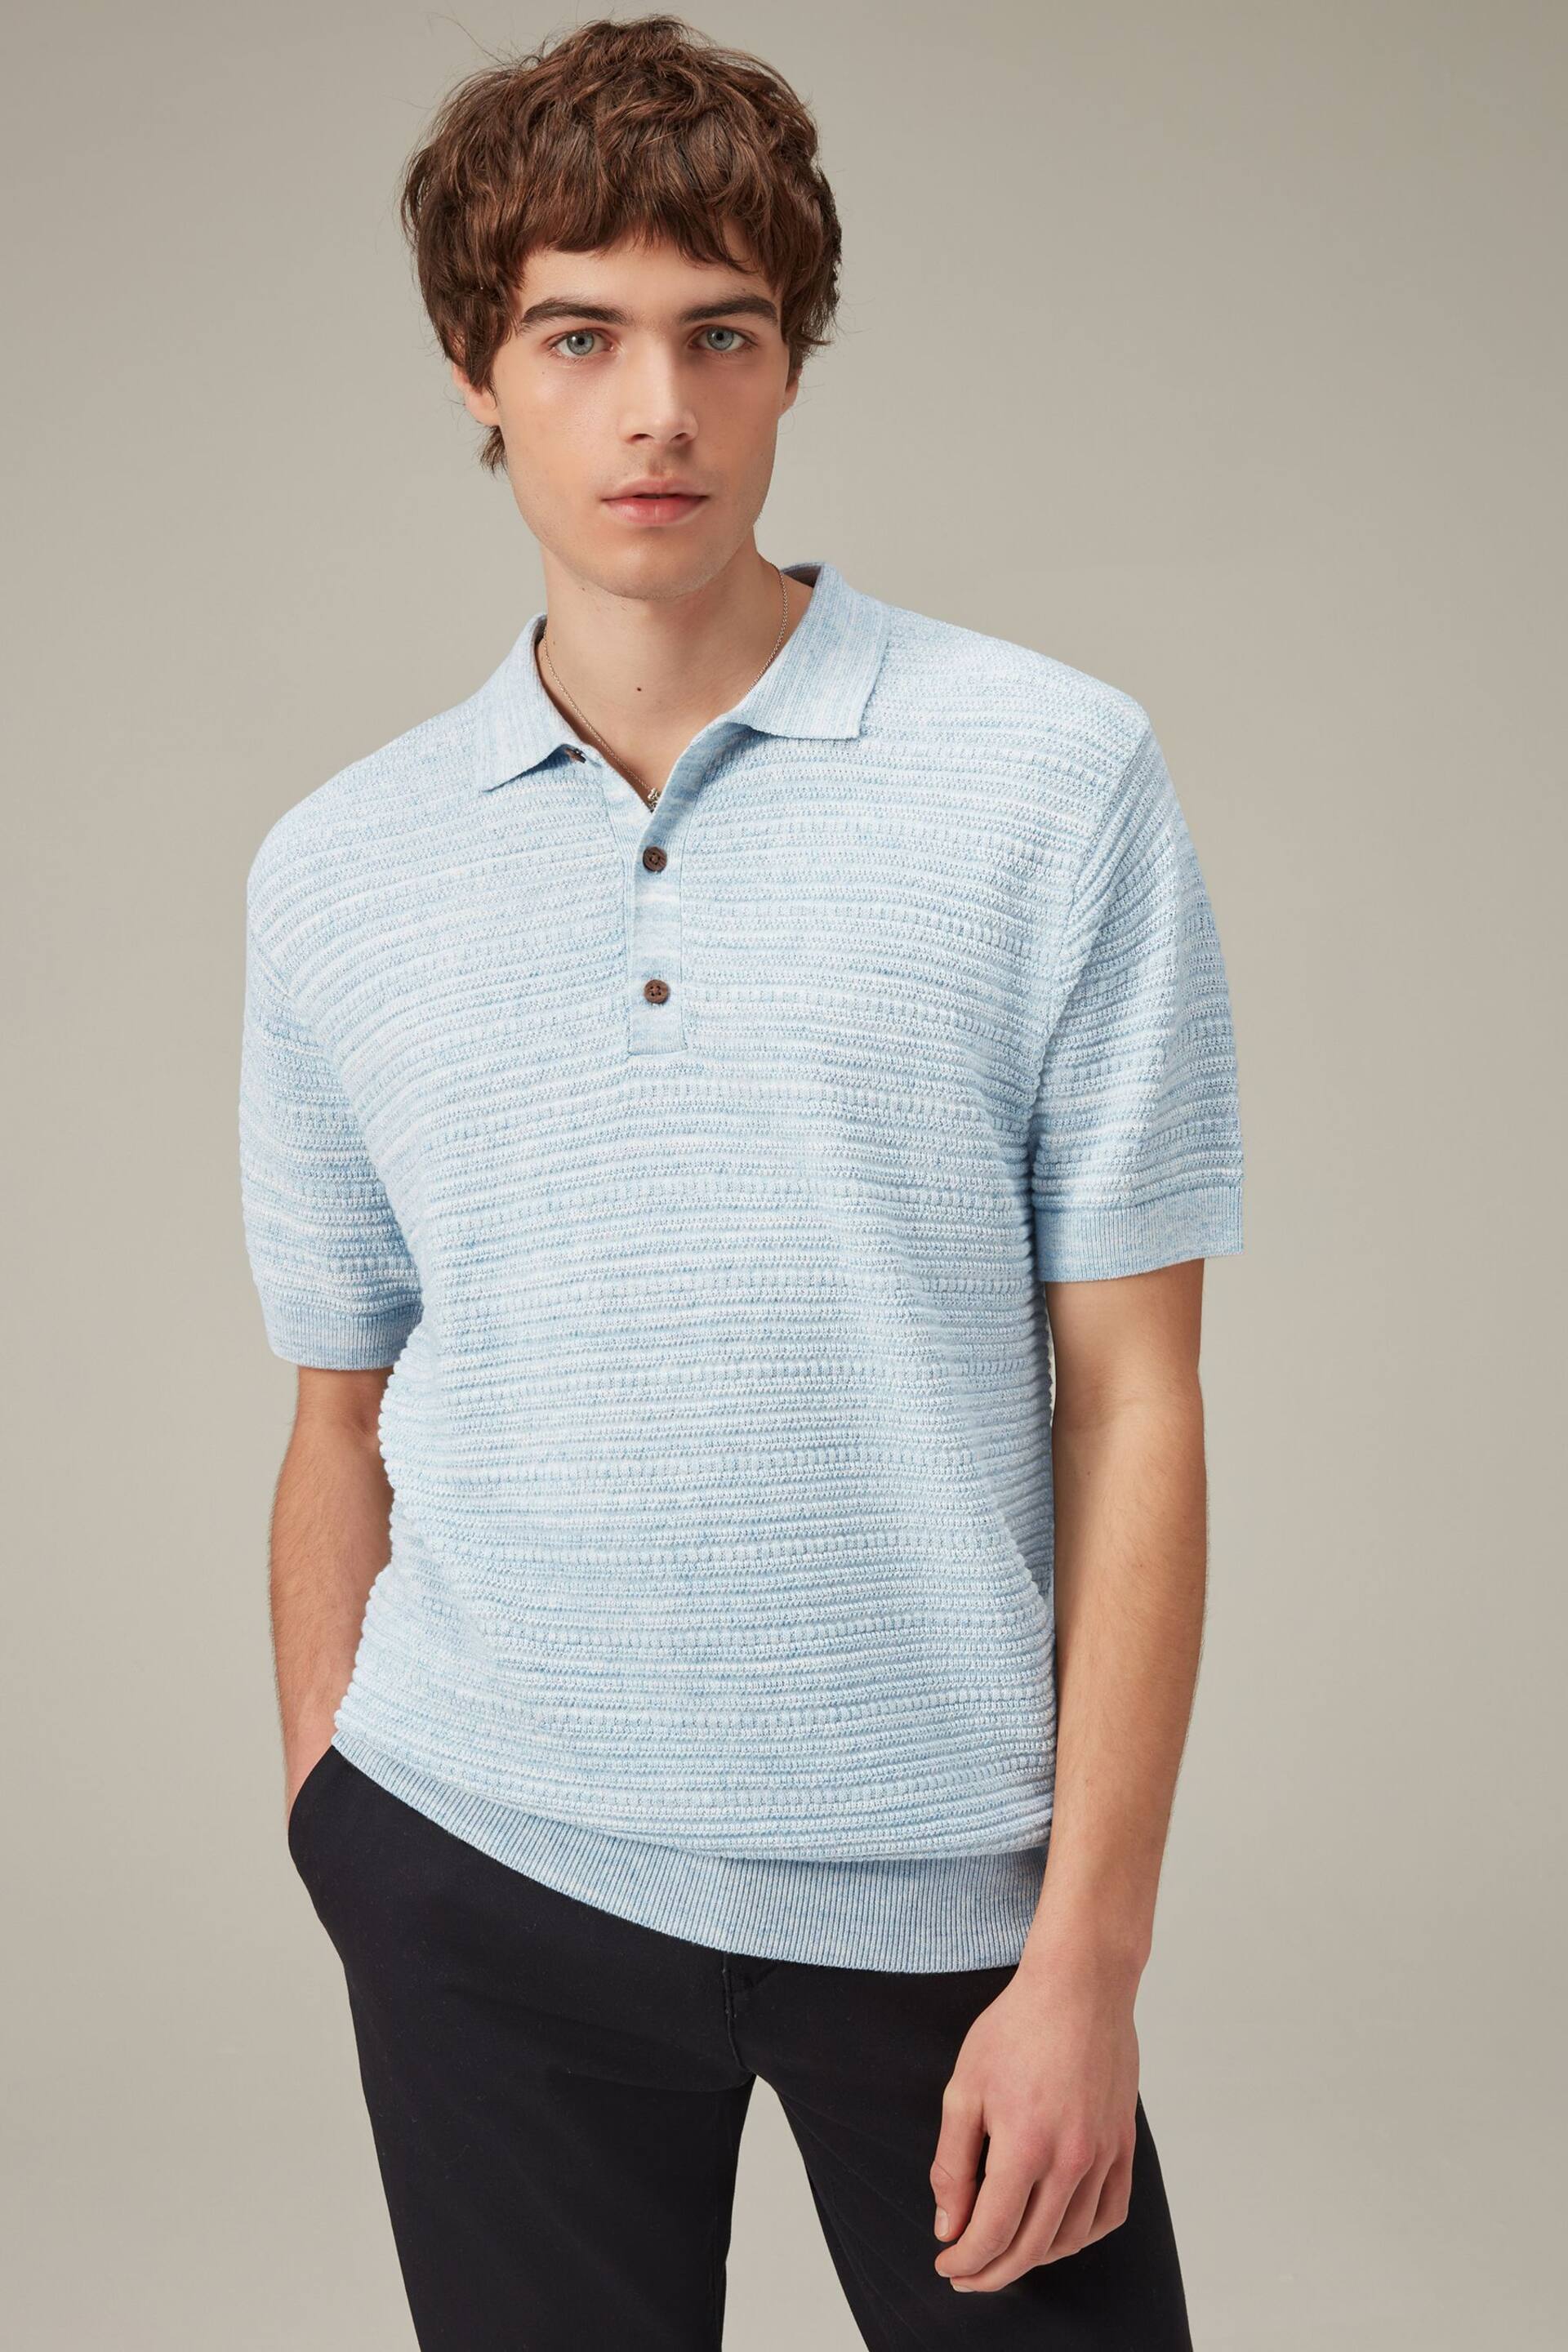 Blue Texture Linen Blend Knitted Polo Shirt - Image 1 of 3